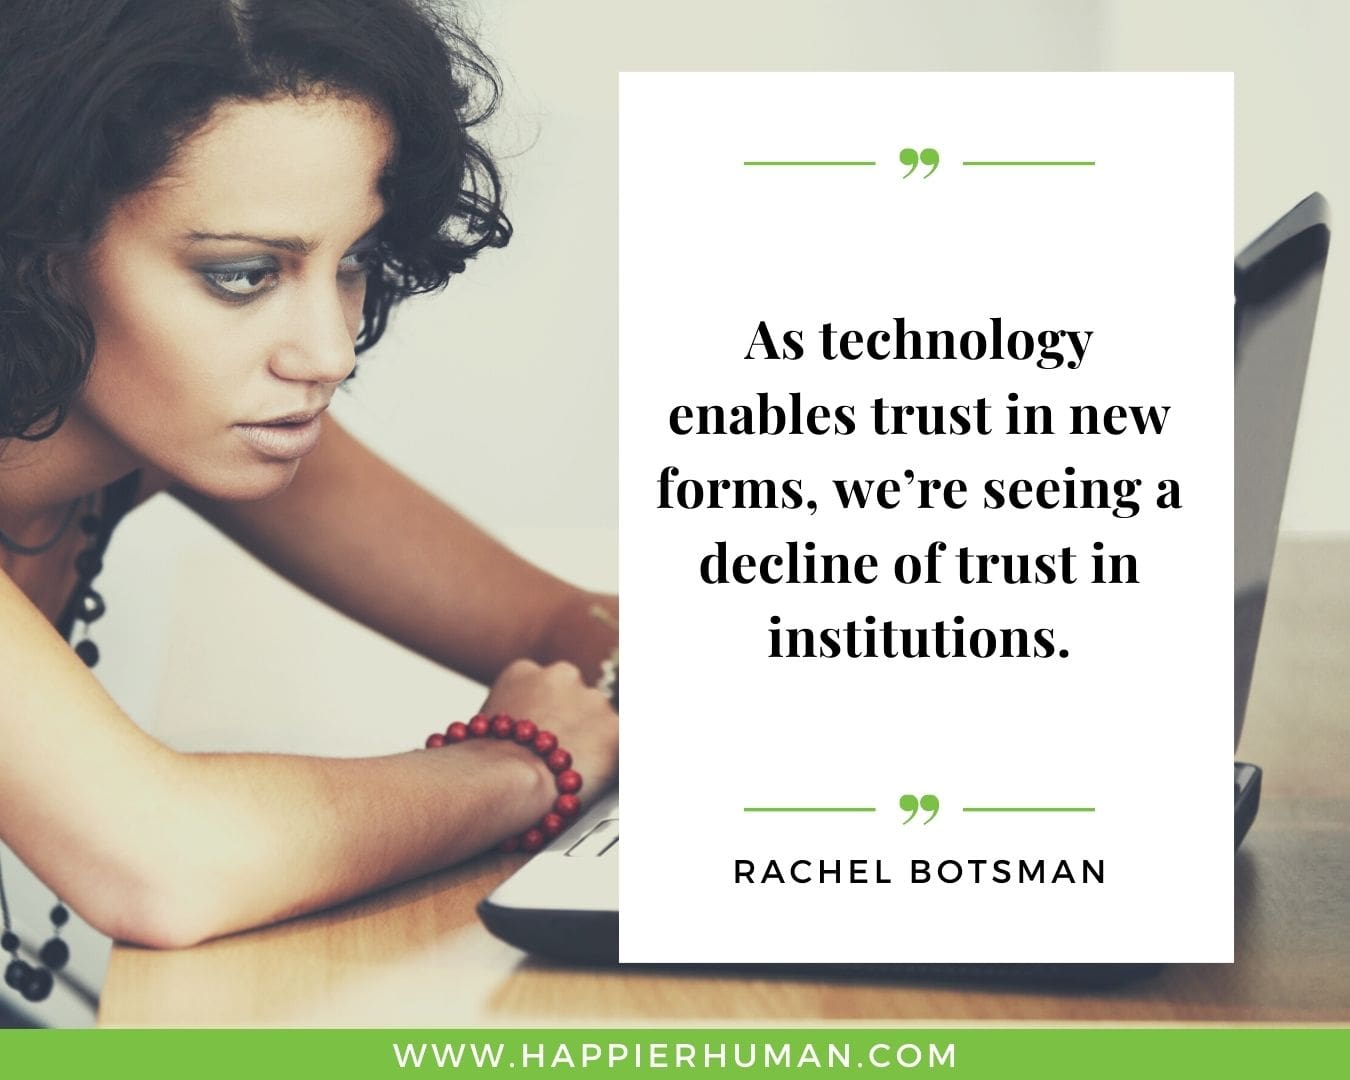 Broken Trust Quotes - “As technology enables trust in new forms, we’re seeing a decline of trust in institutions.” - Rachel Botsman